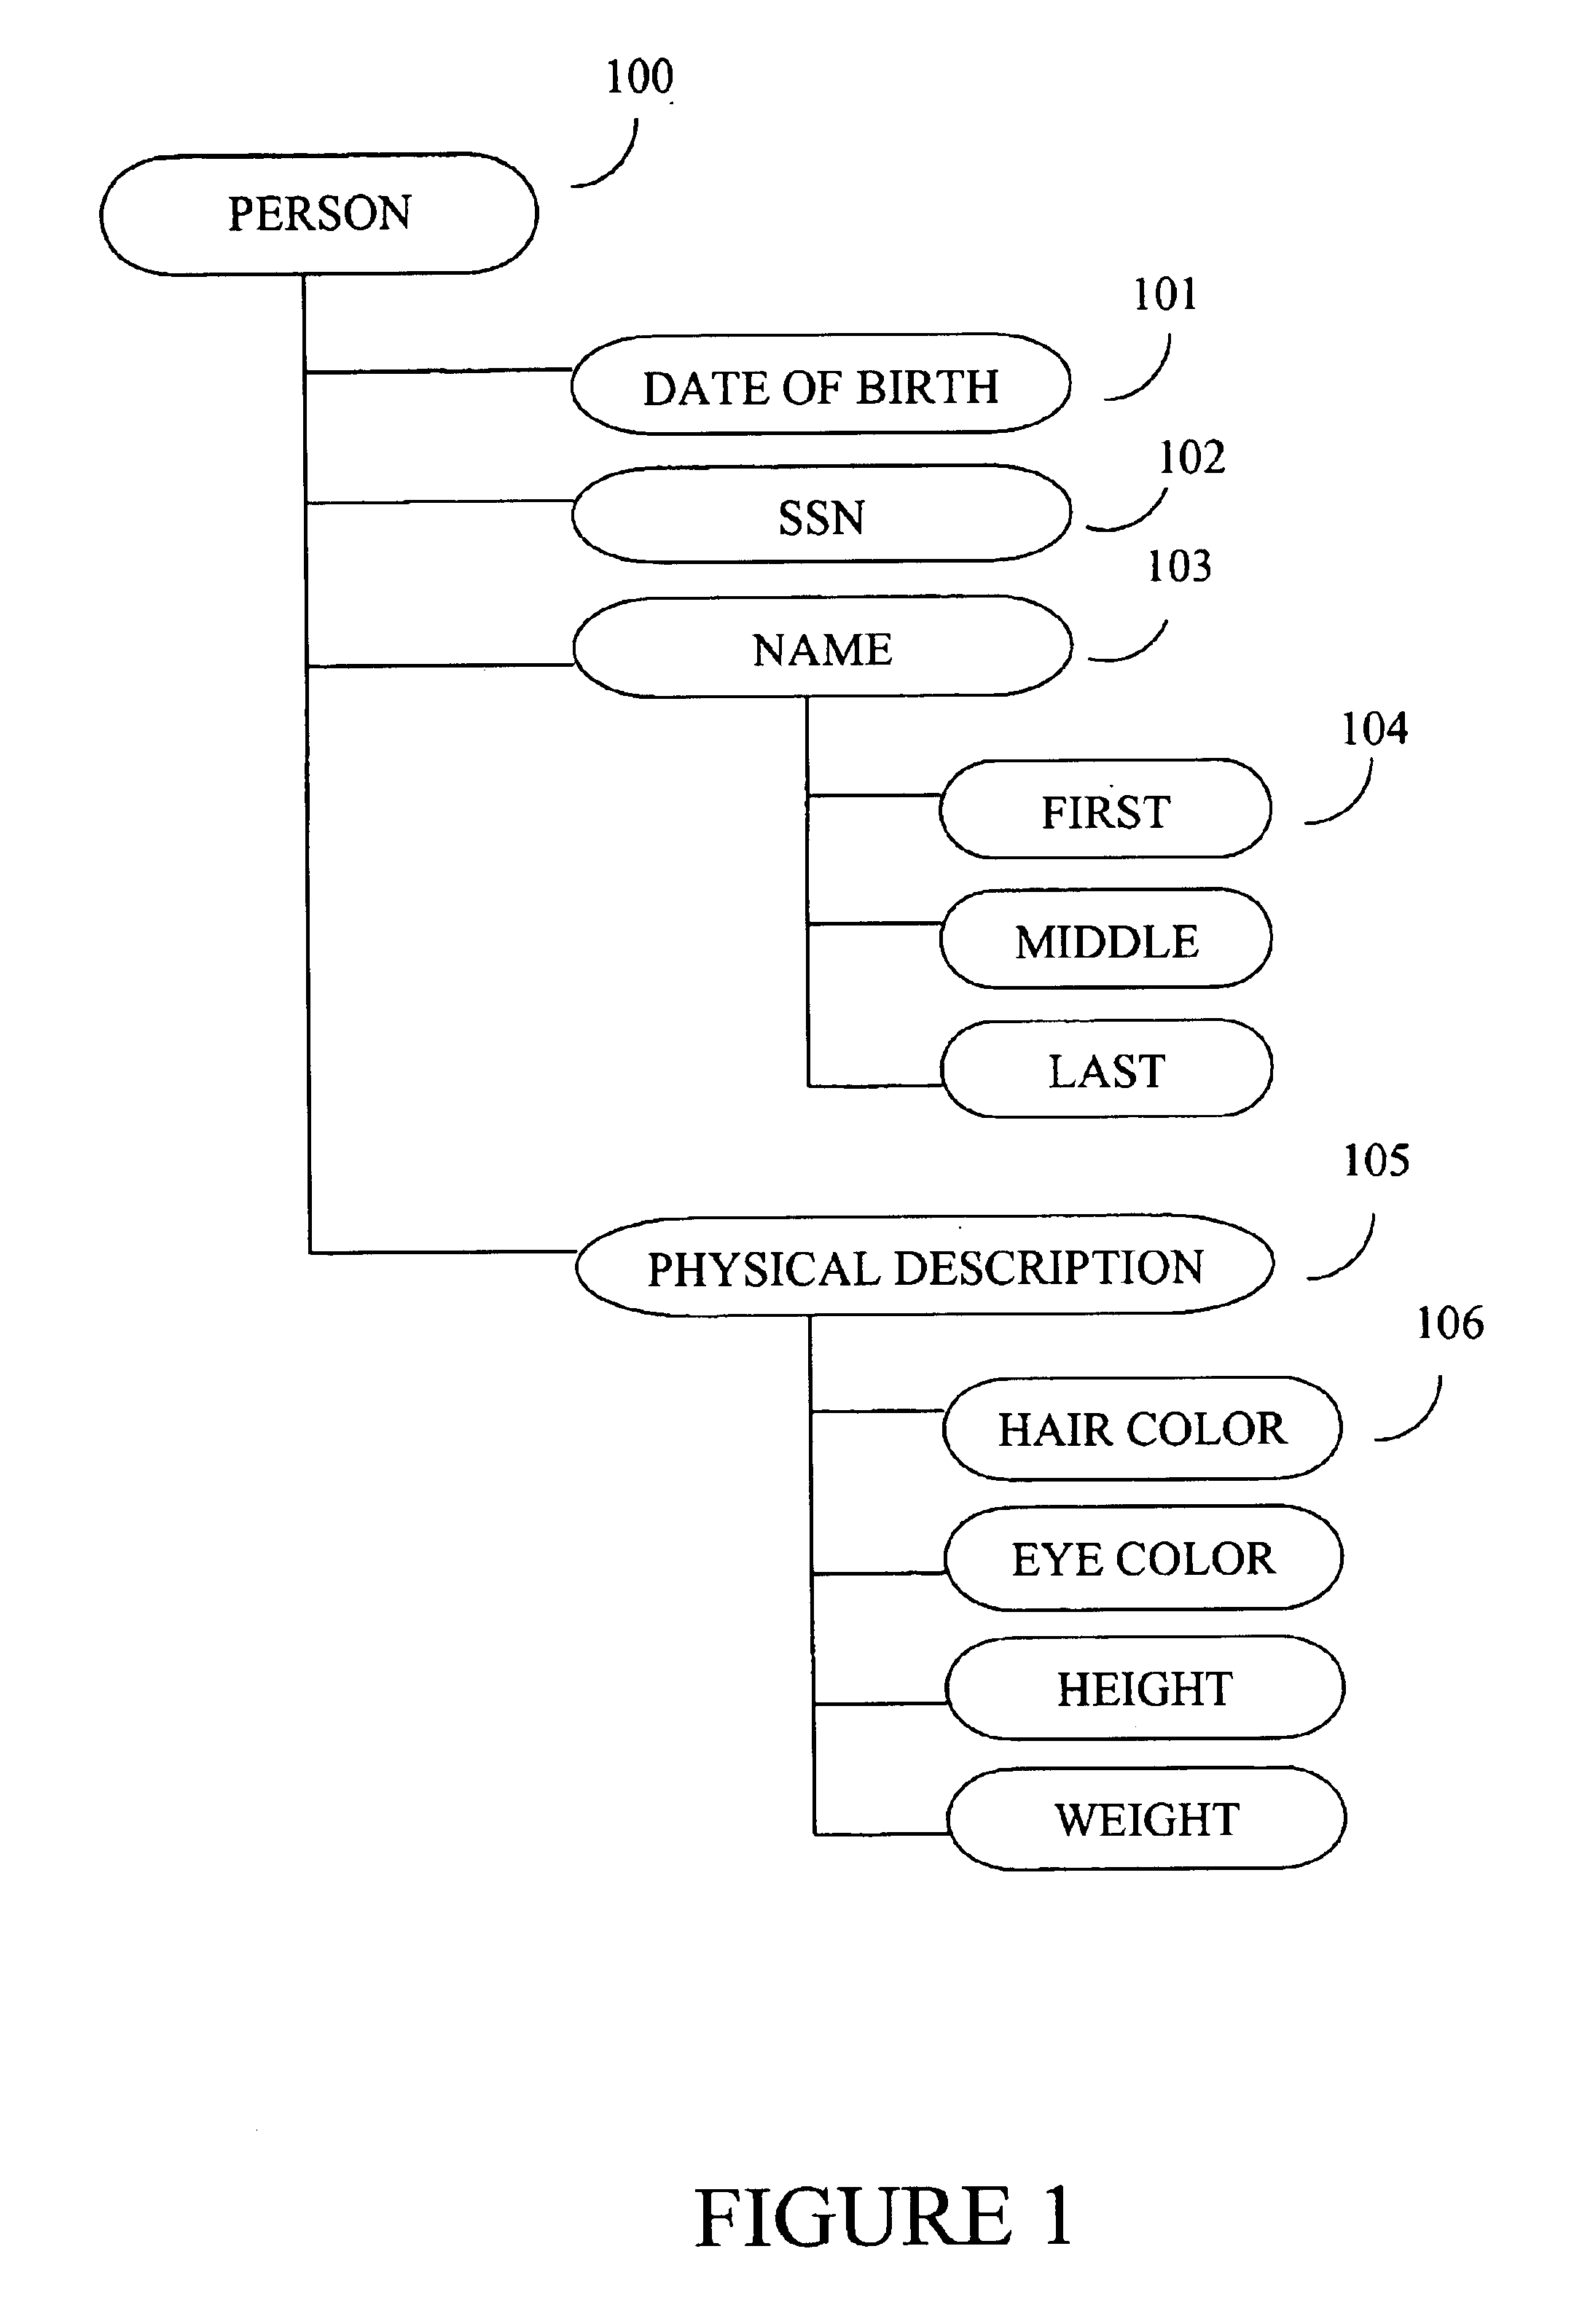 System and method for sharing, mapping, transforming data between relational and hierarchical databases